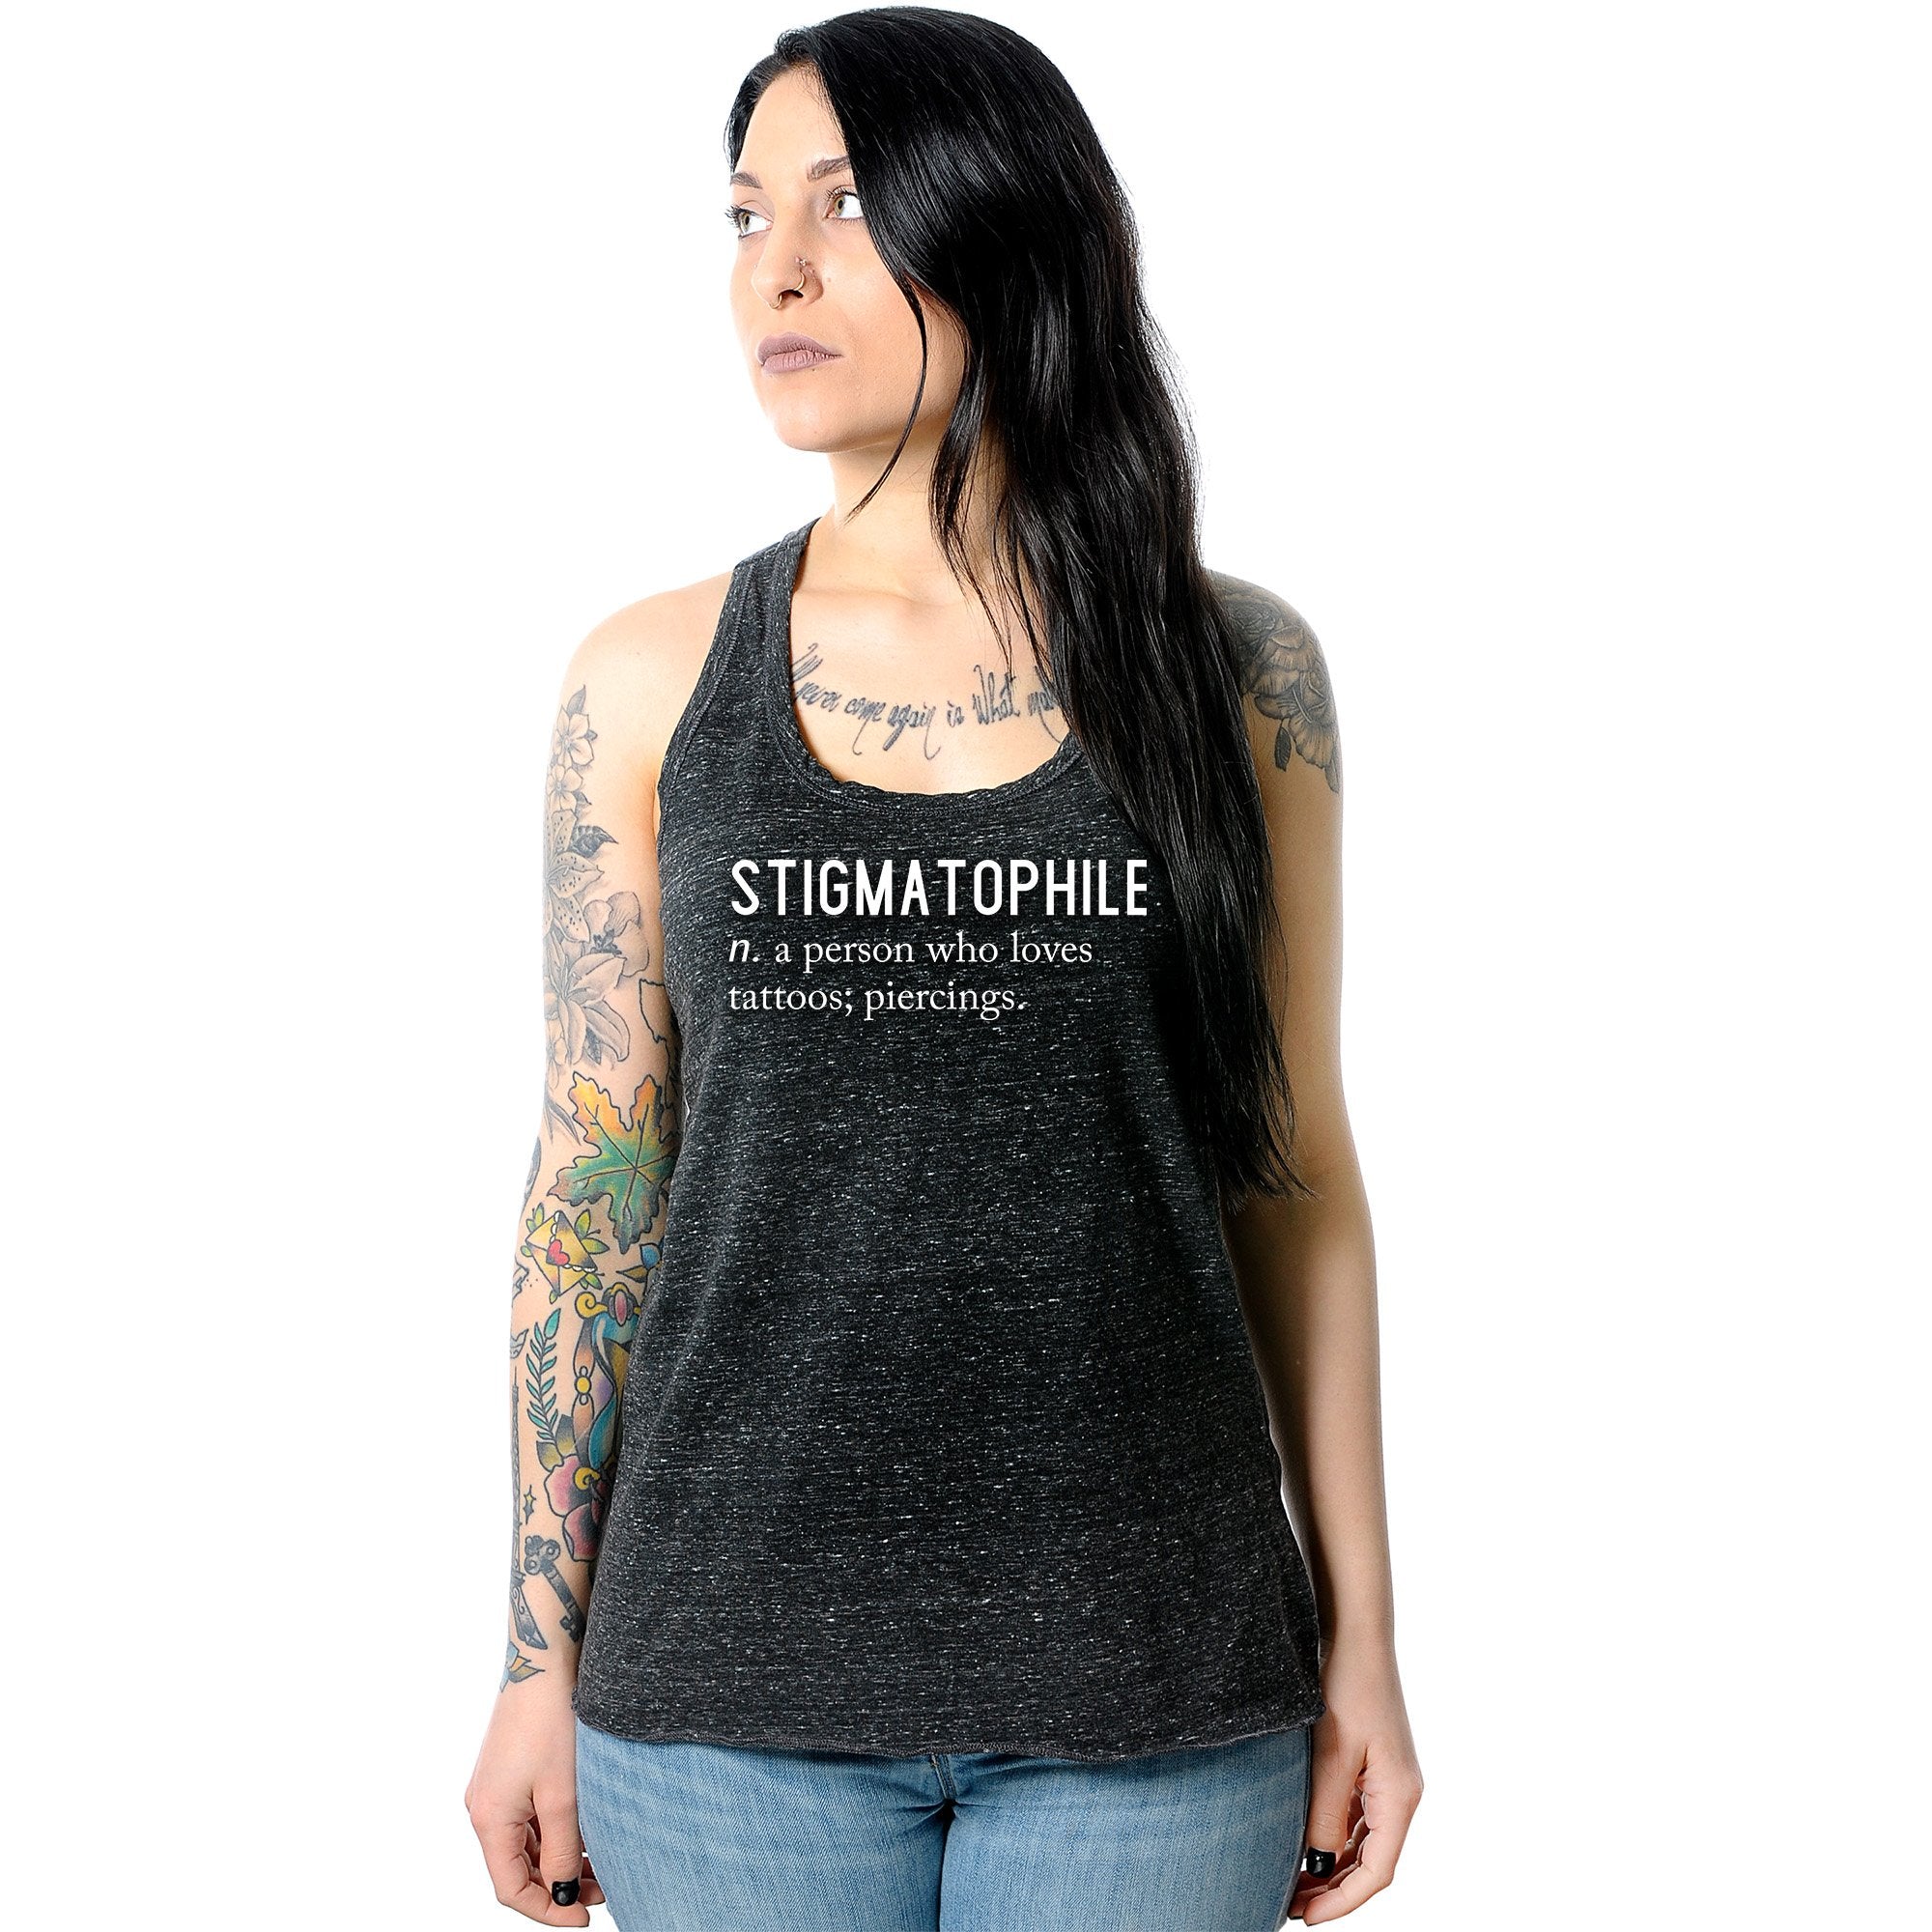 Stigmatophile n. a person who loves tattoos; piercings. Black Gray Cosmic Twist Back Tank Top